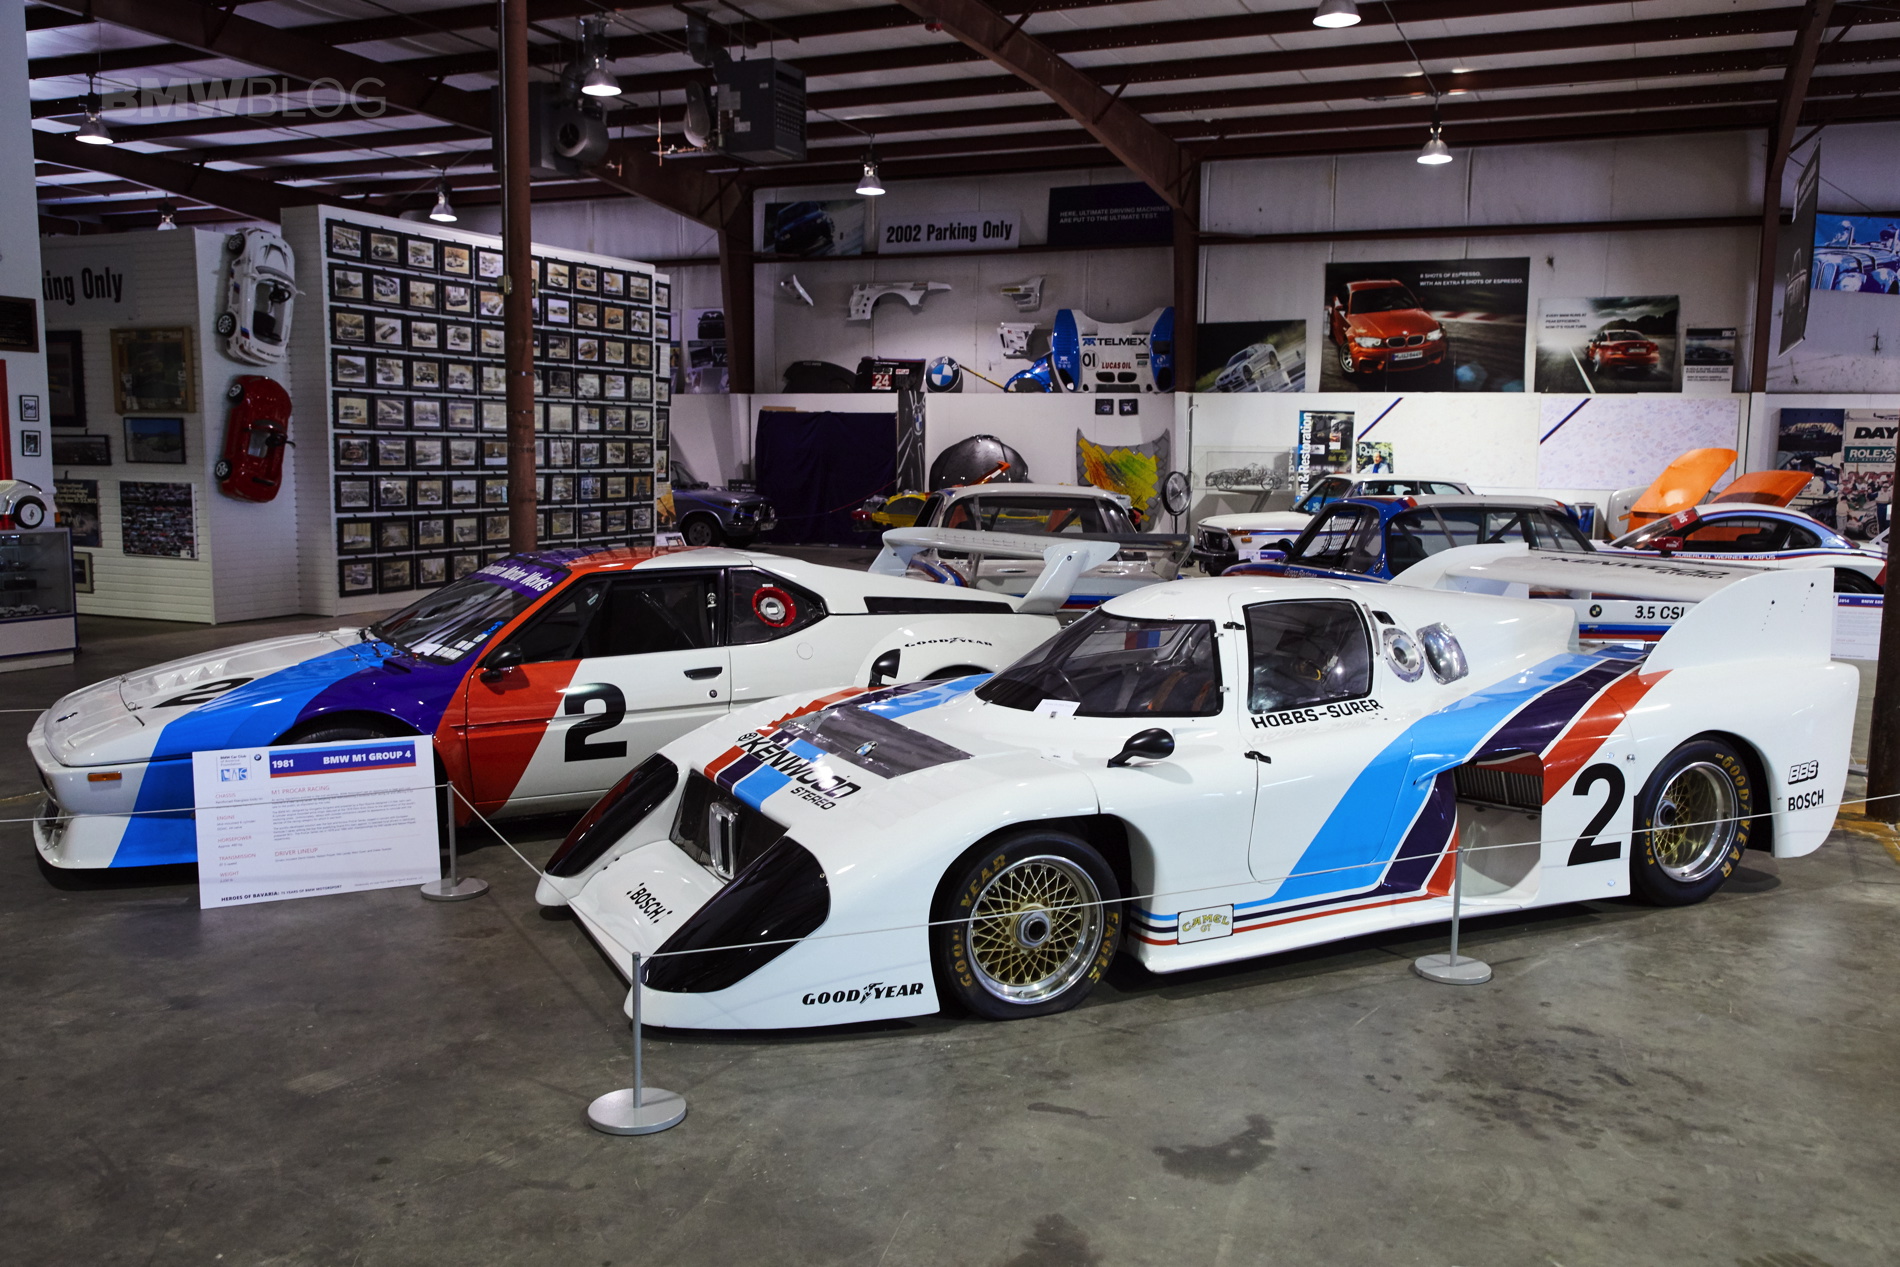 photo-gallery-bmw-car-club-of-america-foundation-s-collection-of